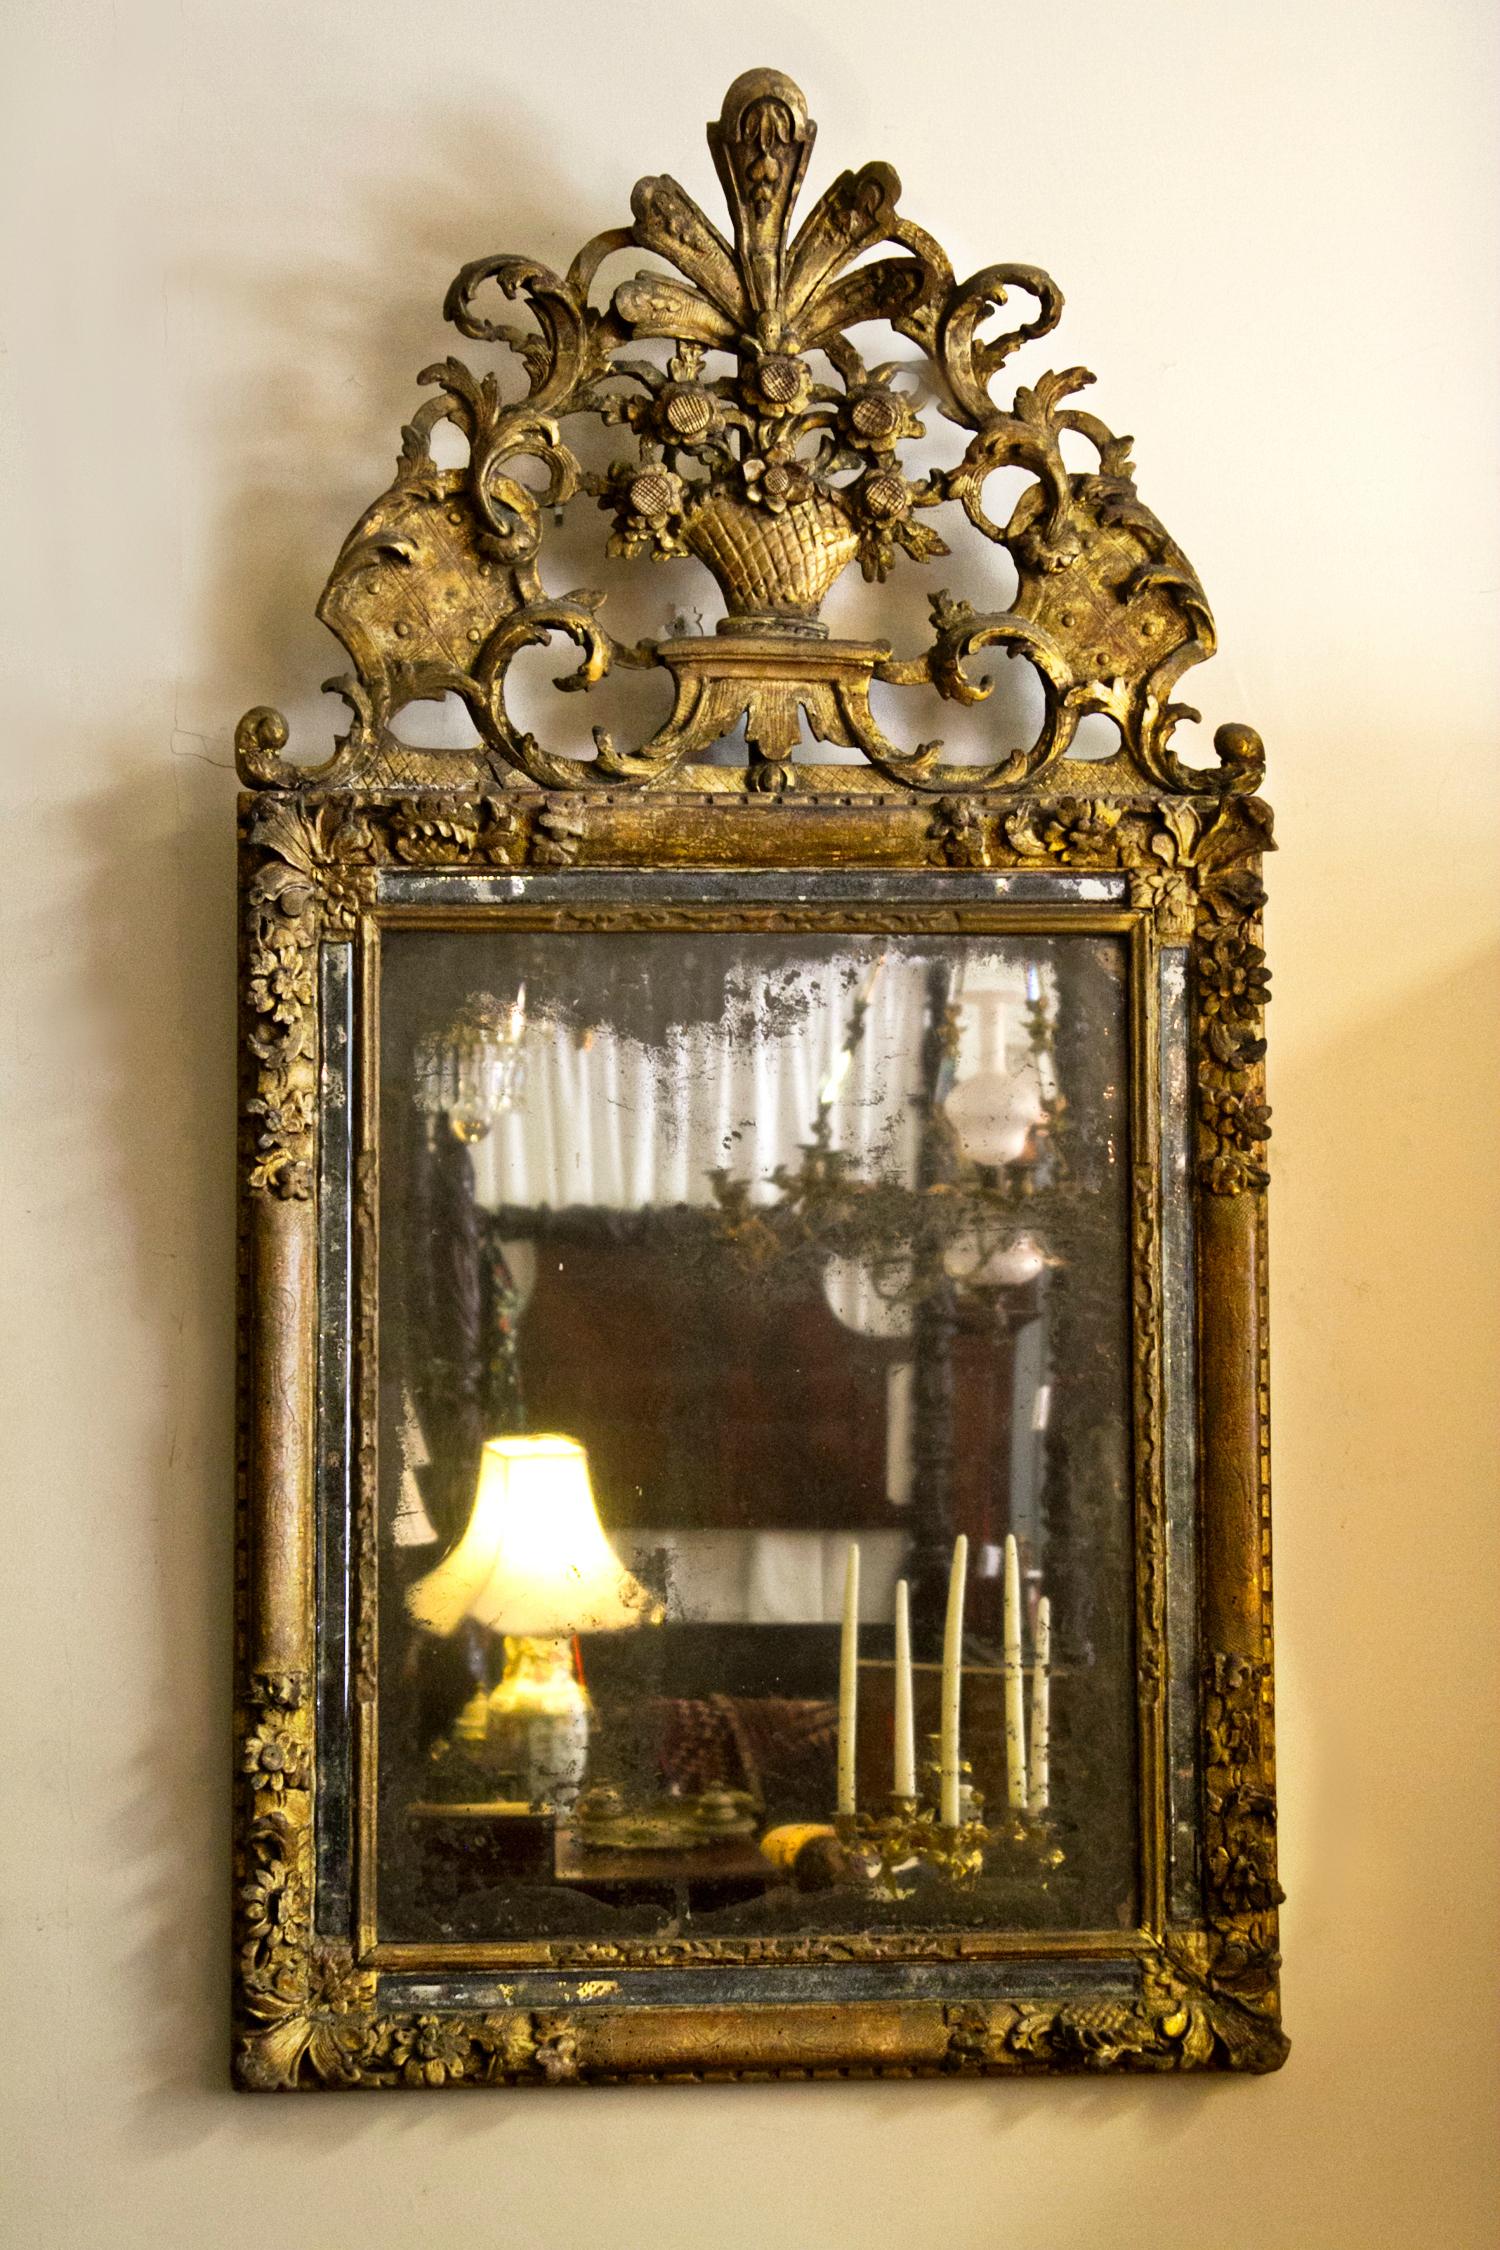 Early 18th Century French Baroque Gilt Mirror In Good Condition For Sale In Savannah, GA